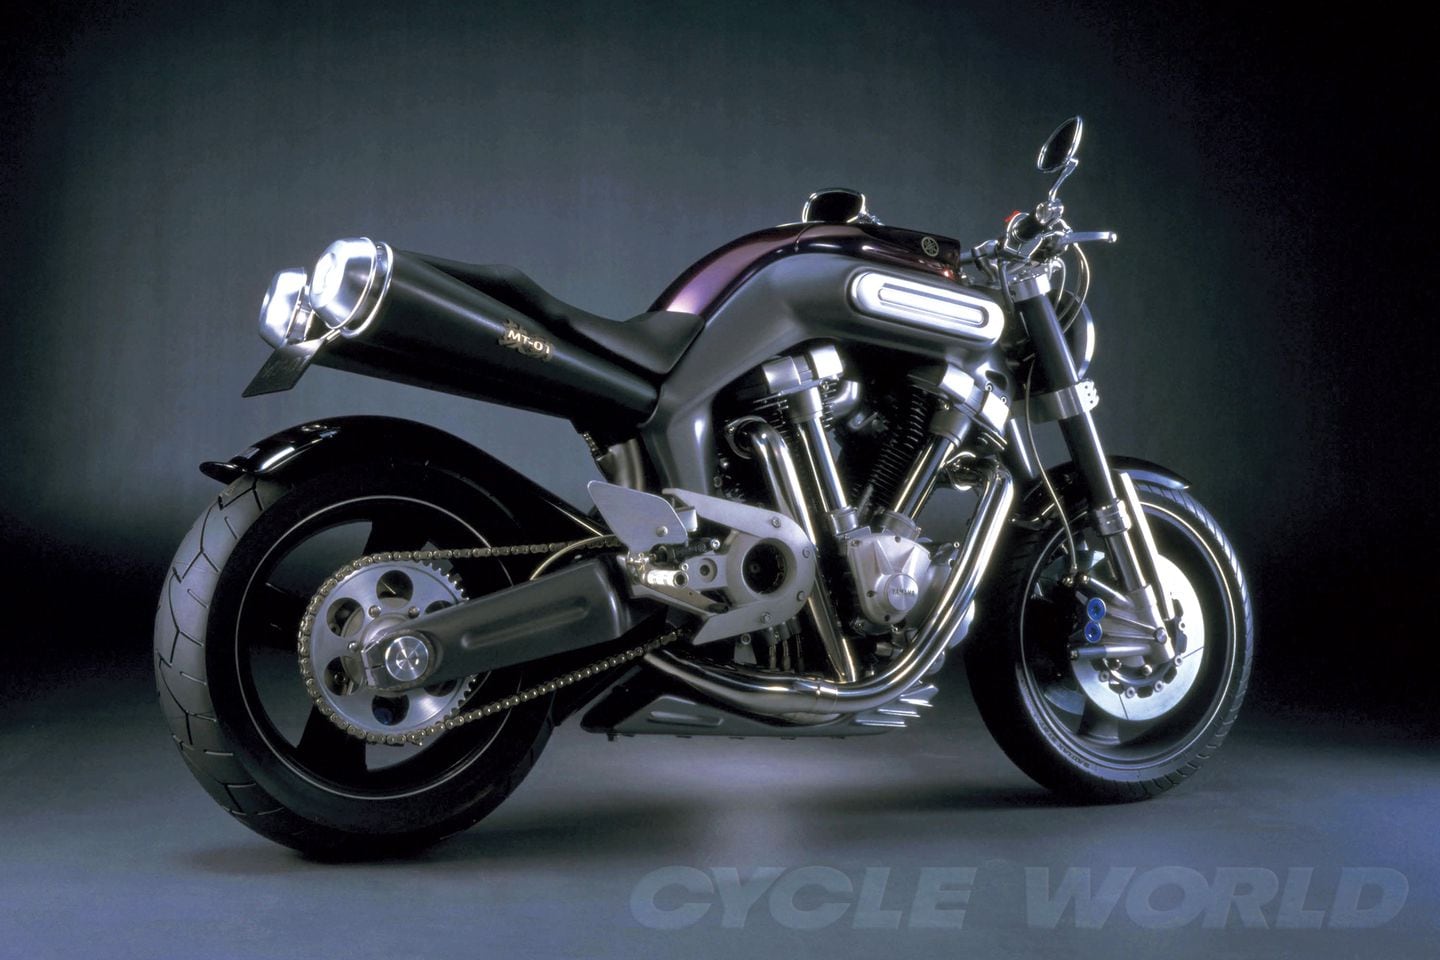 Crazy Concept Motorcycles of the Past | Cycle World